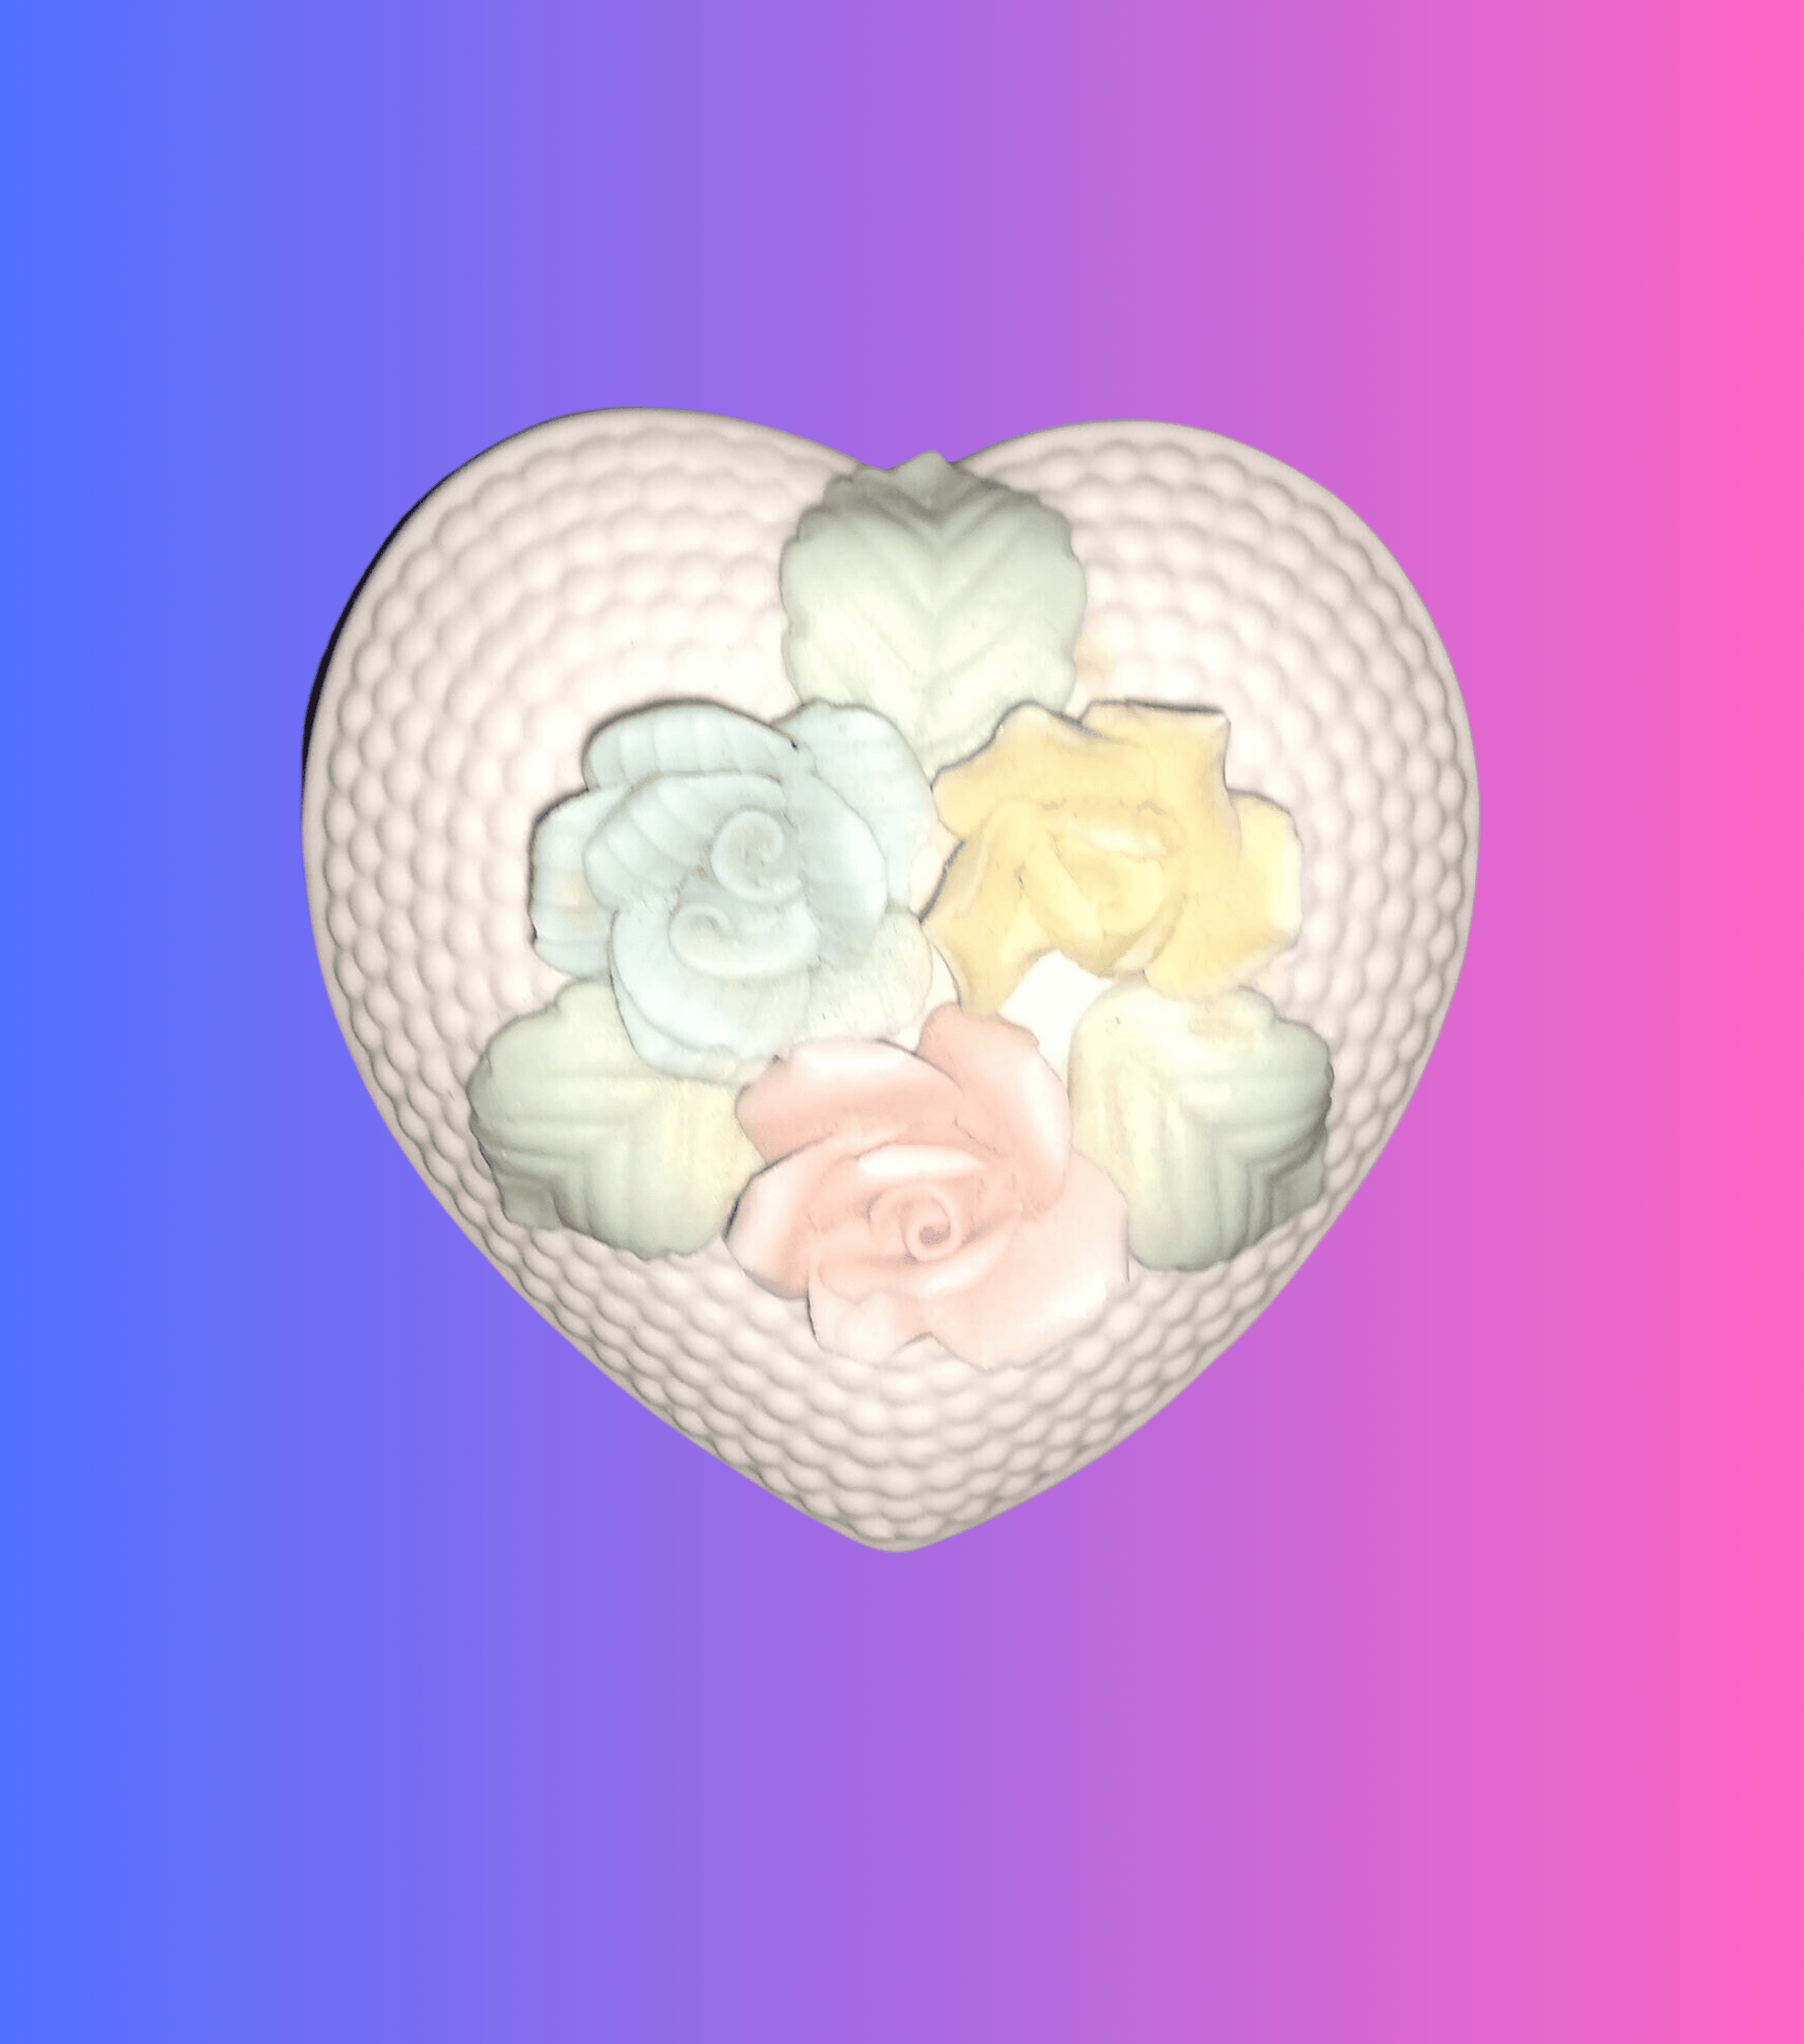 Norleans japan Flower Jewelry Box.  Heart Flower trinket box.  Art Deco.  A porcelain heart shaped jewelry box with colorful roses.